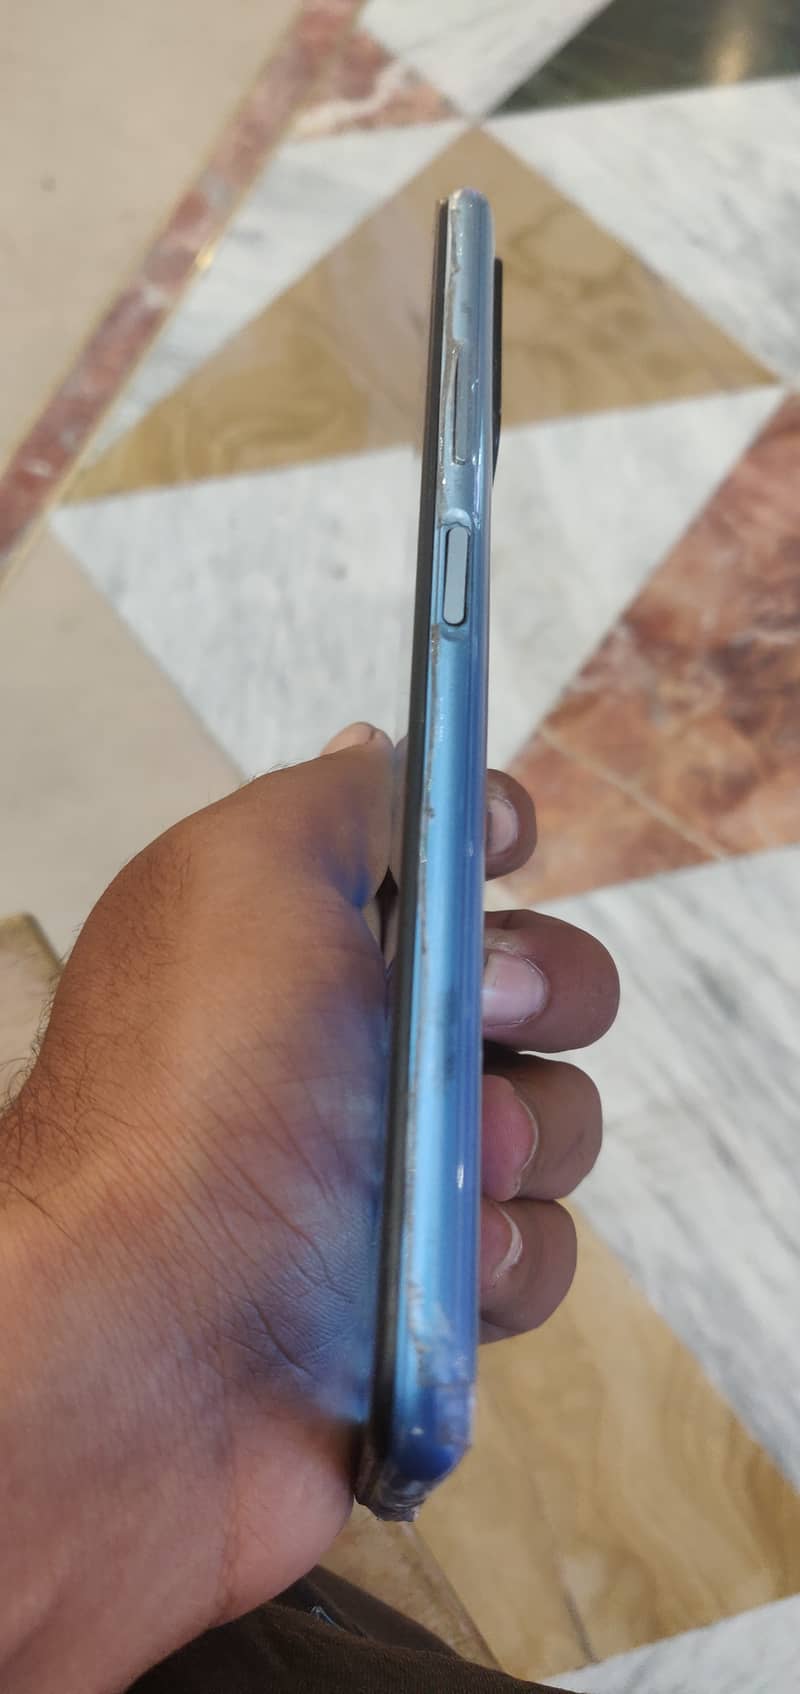 Infinix note 8 i condition 10/9 6/128 Smart phone 2